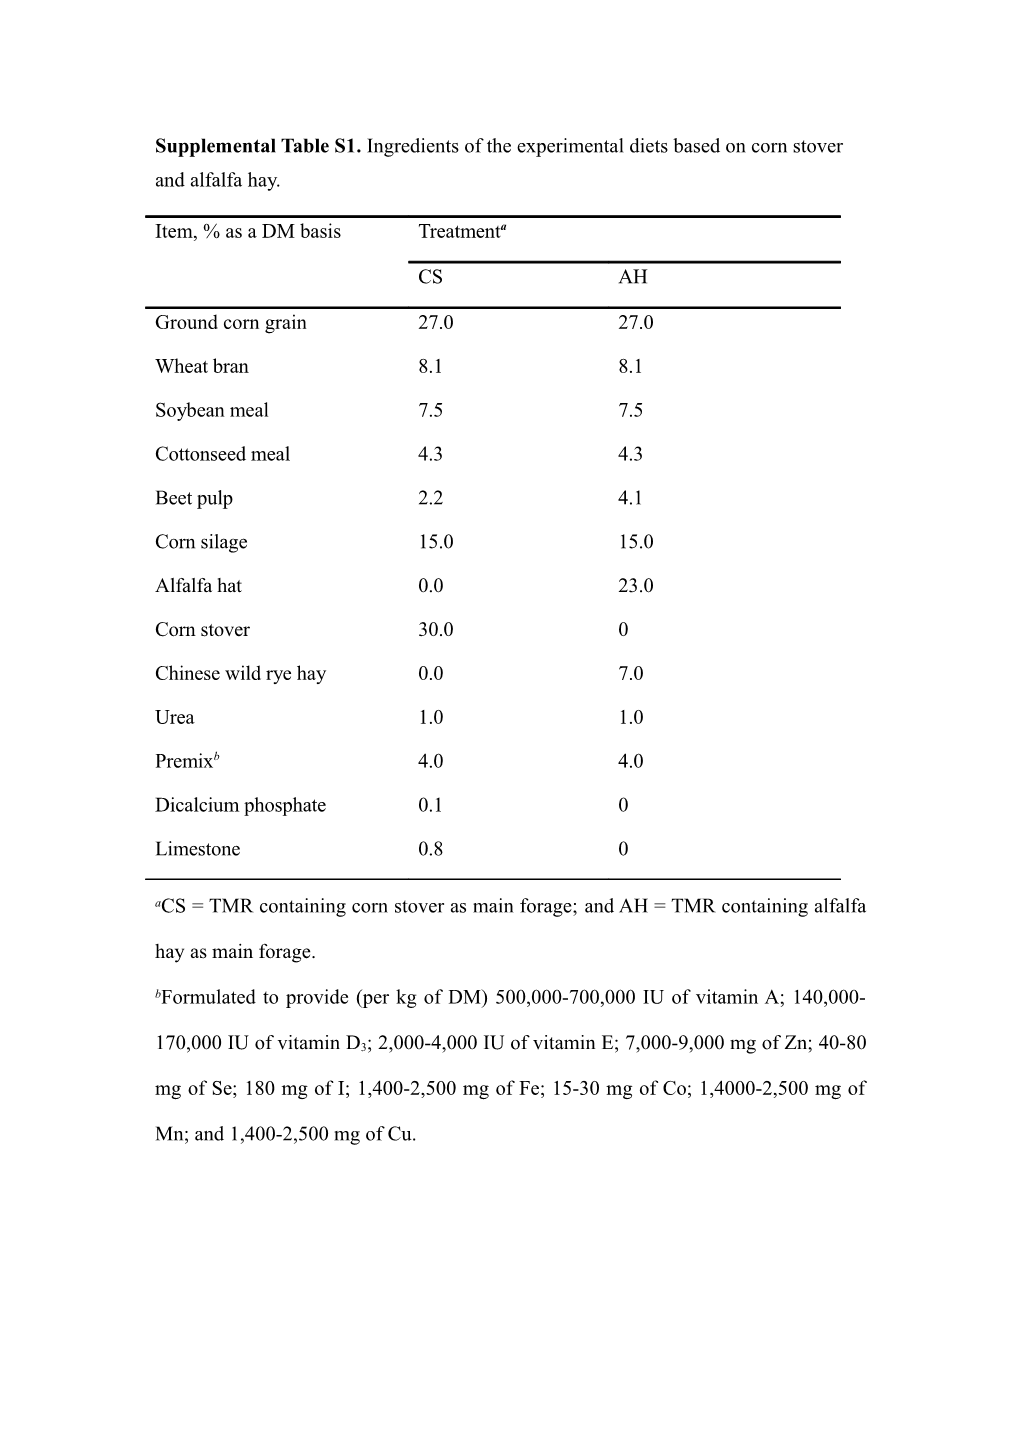 Supplemental Table S1. Ingredients of the Experimental Diets Based on Corn Stover And